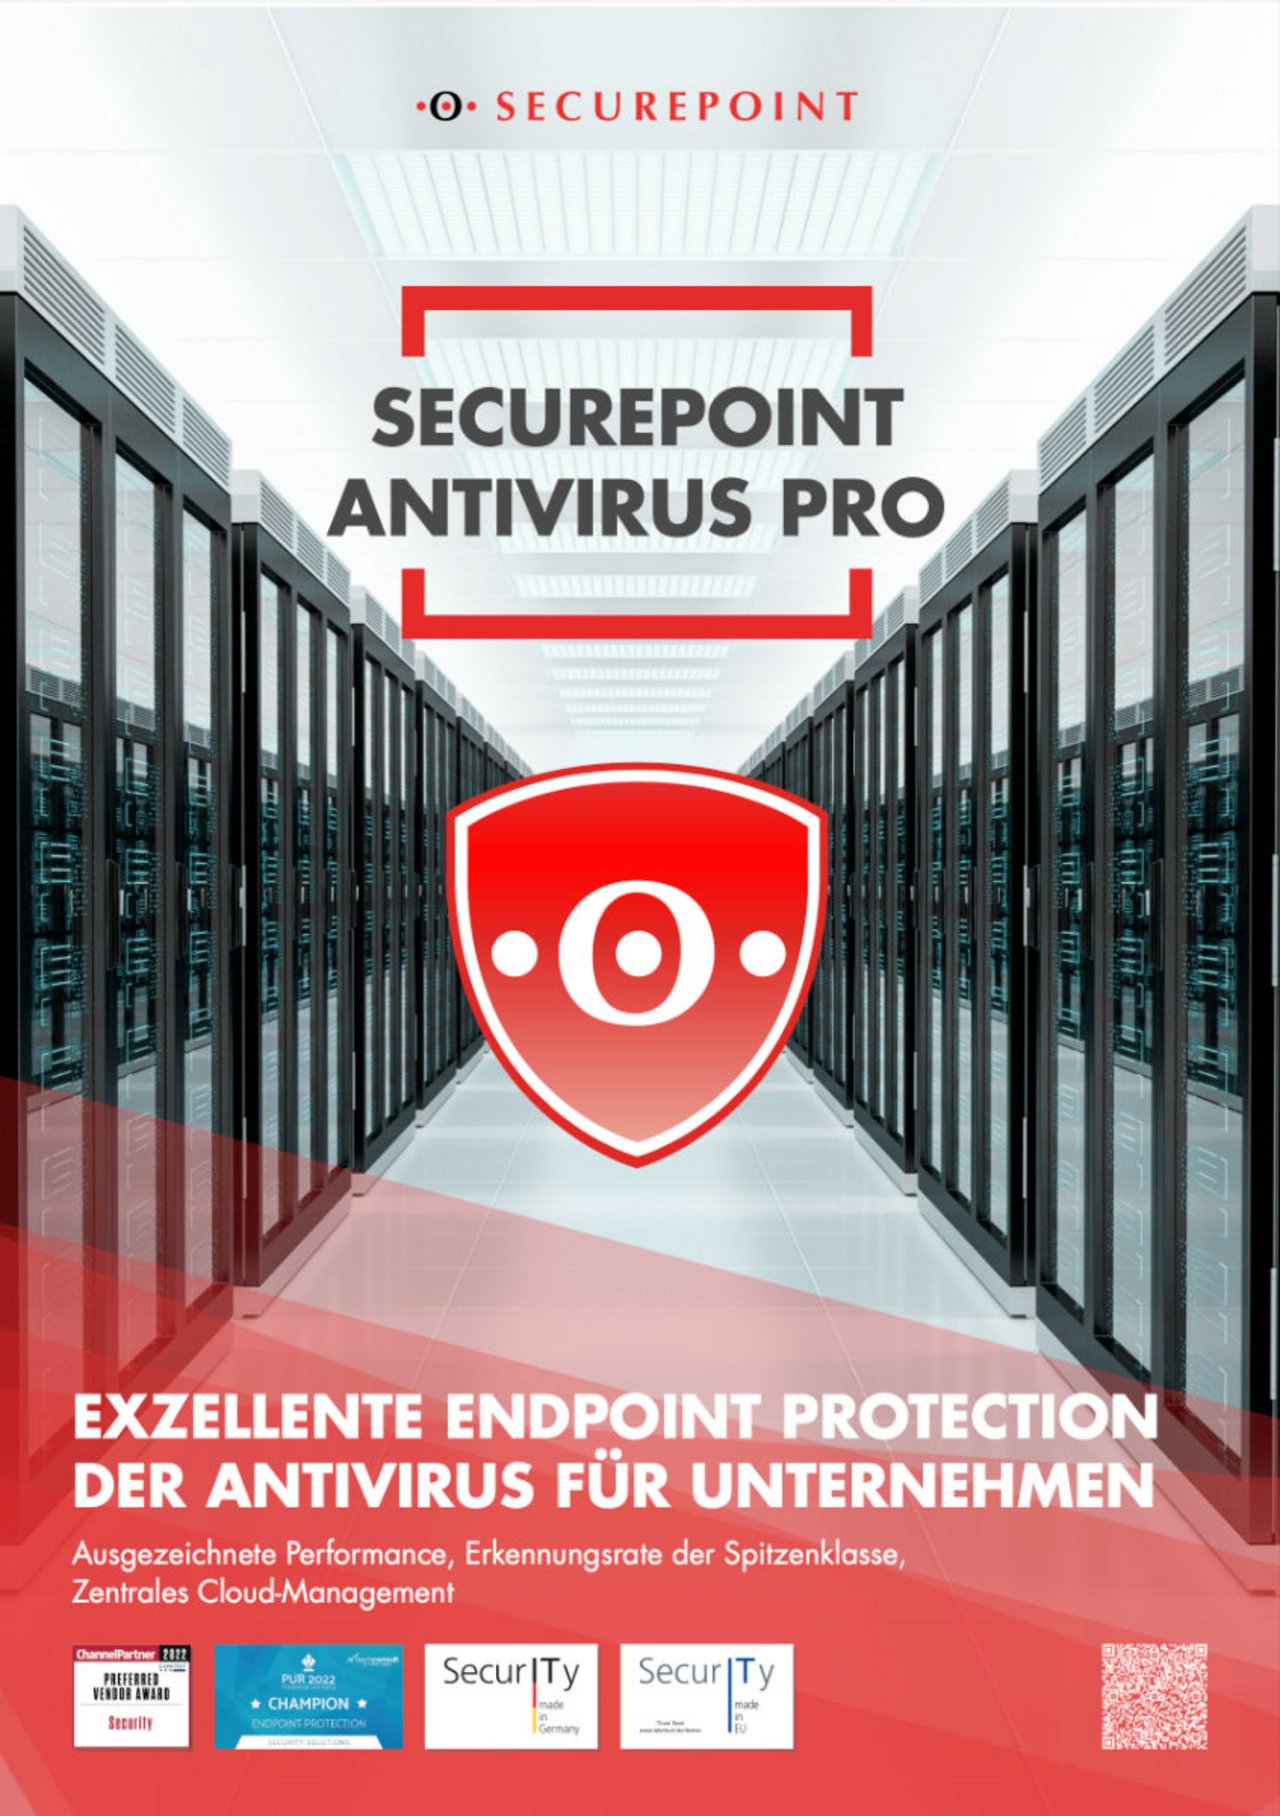 Cover picture of the Securepoint Antivirus Pro brochure